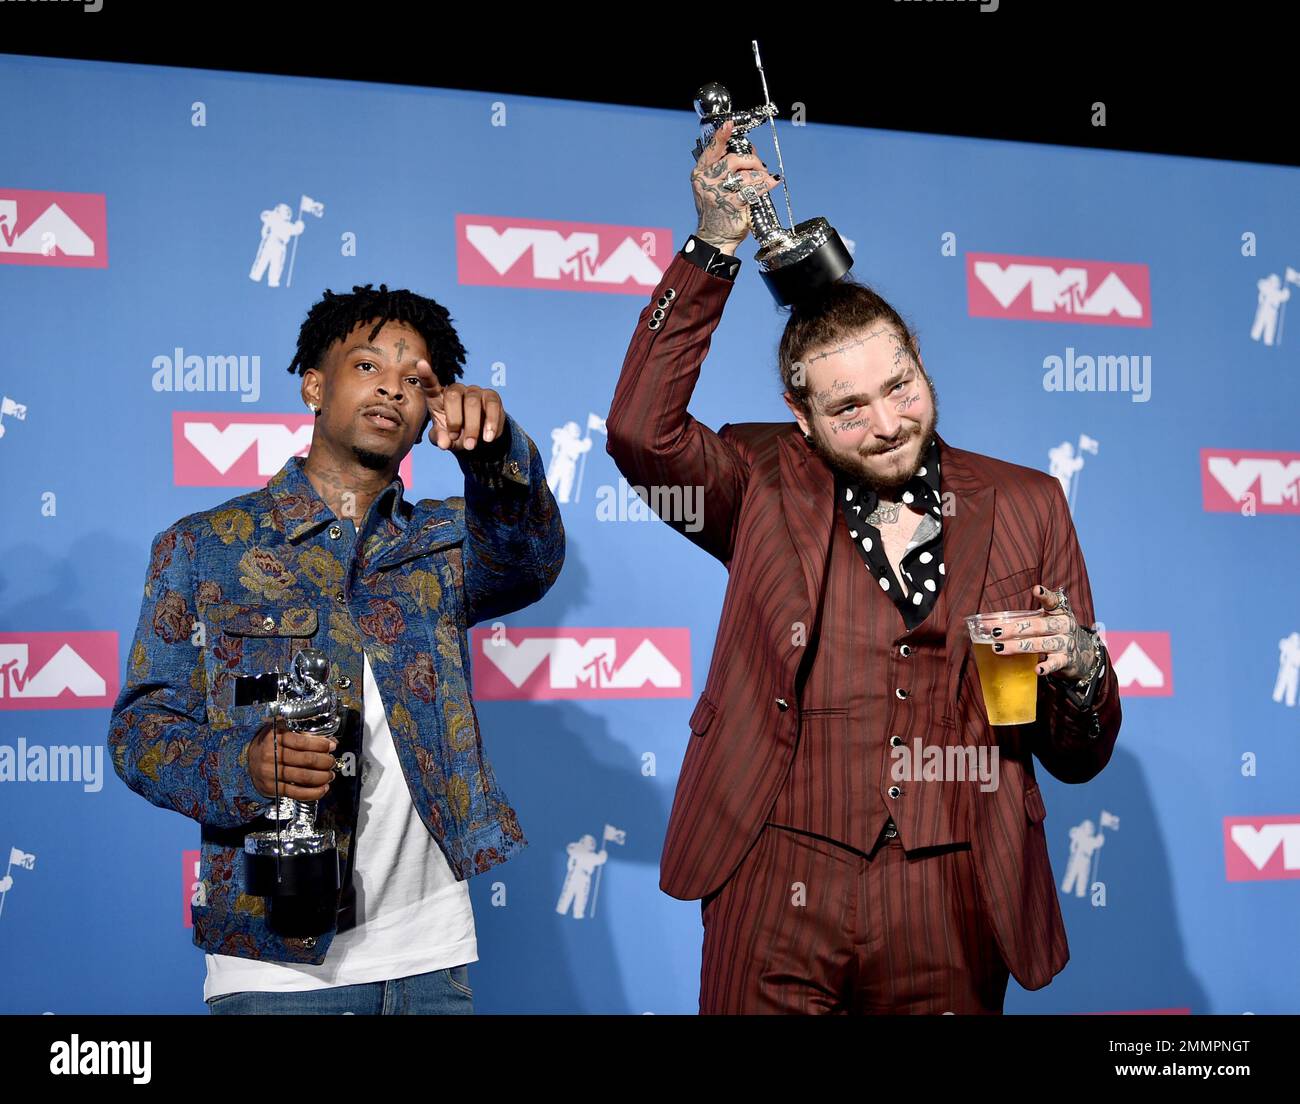 Post Malone - rockstar (Live From The MTV VMAs) ft. 21 Savage 